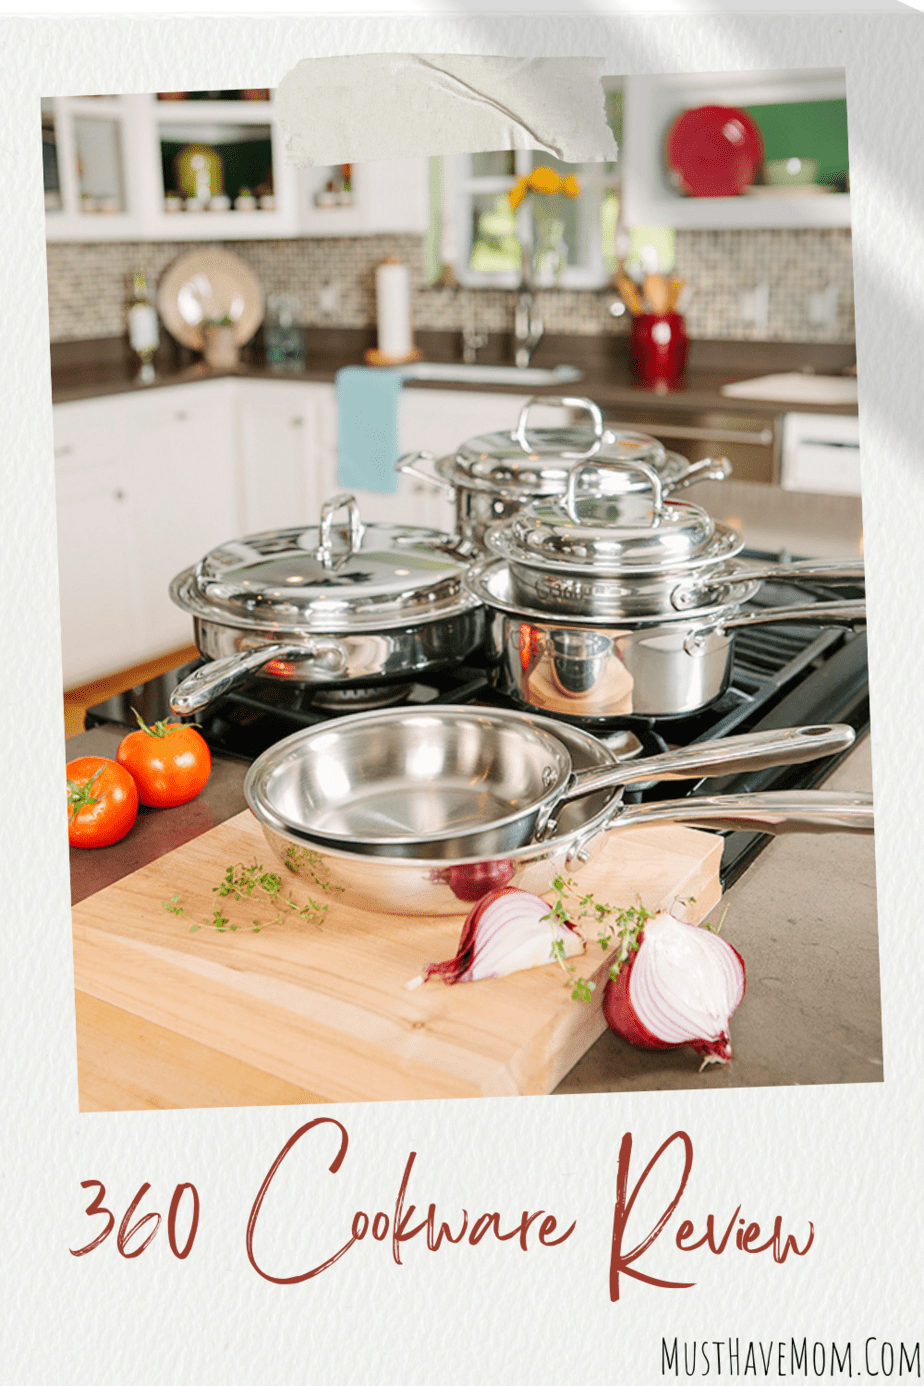 Find out why 360 Cookware is the best choice for at-home cooks with this 360 cookware review. From baking to frying, 360 Cookware can handle it all.